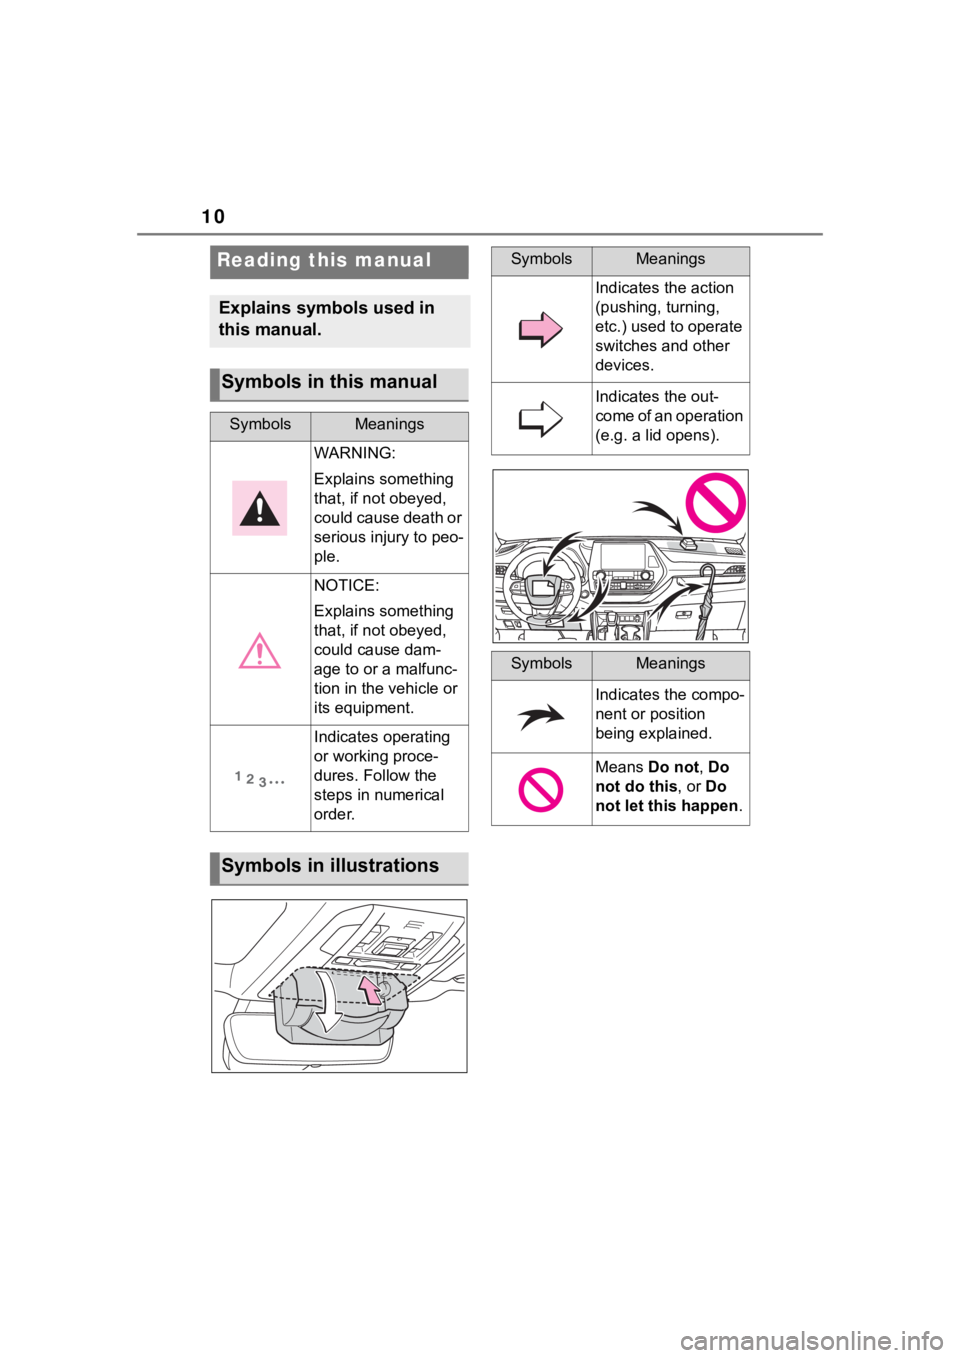 TOYOTA HIGHLANDER HYBRID 2022  Owners Manual 10
Reading this manual
Explains symbols used in 
this manual.
Symbols in this manual
SymbolsMeanings
WARNING:
Explains something 
that, if not obeyed, 
could cause death or 
serious injury to peo-
ple